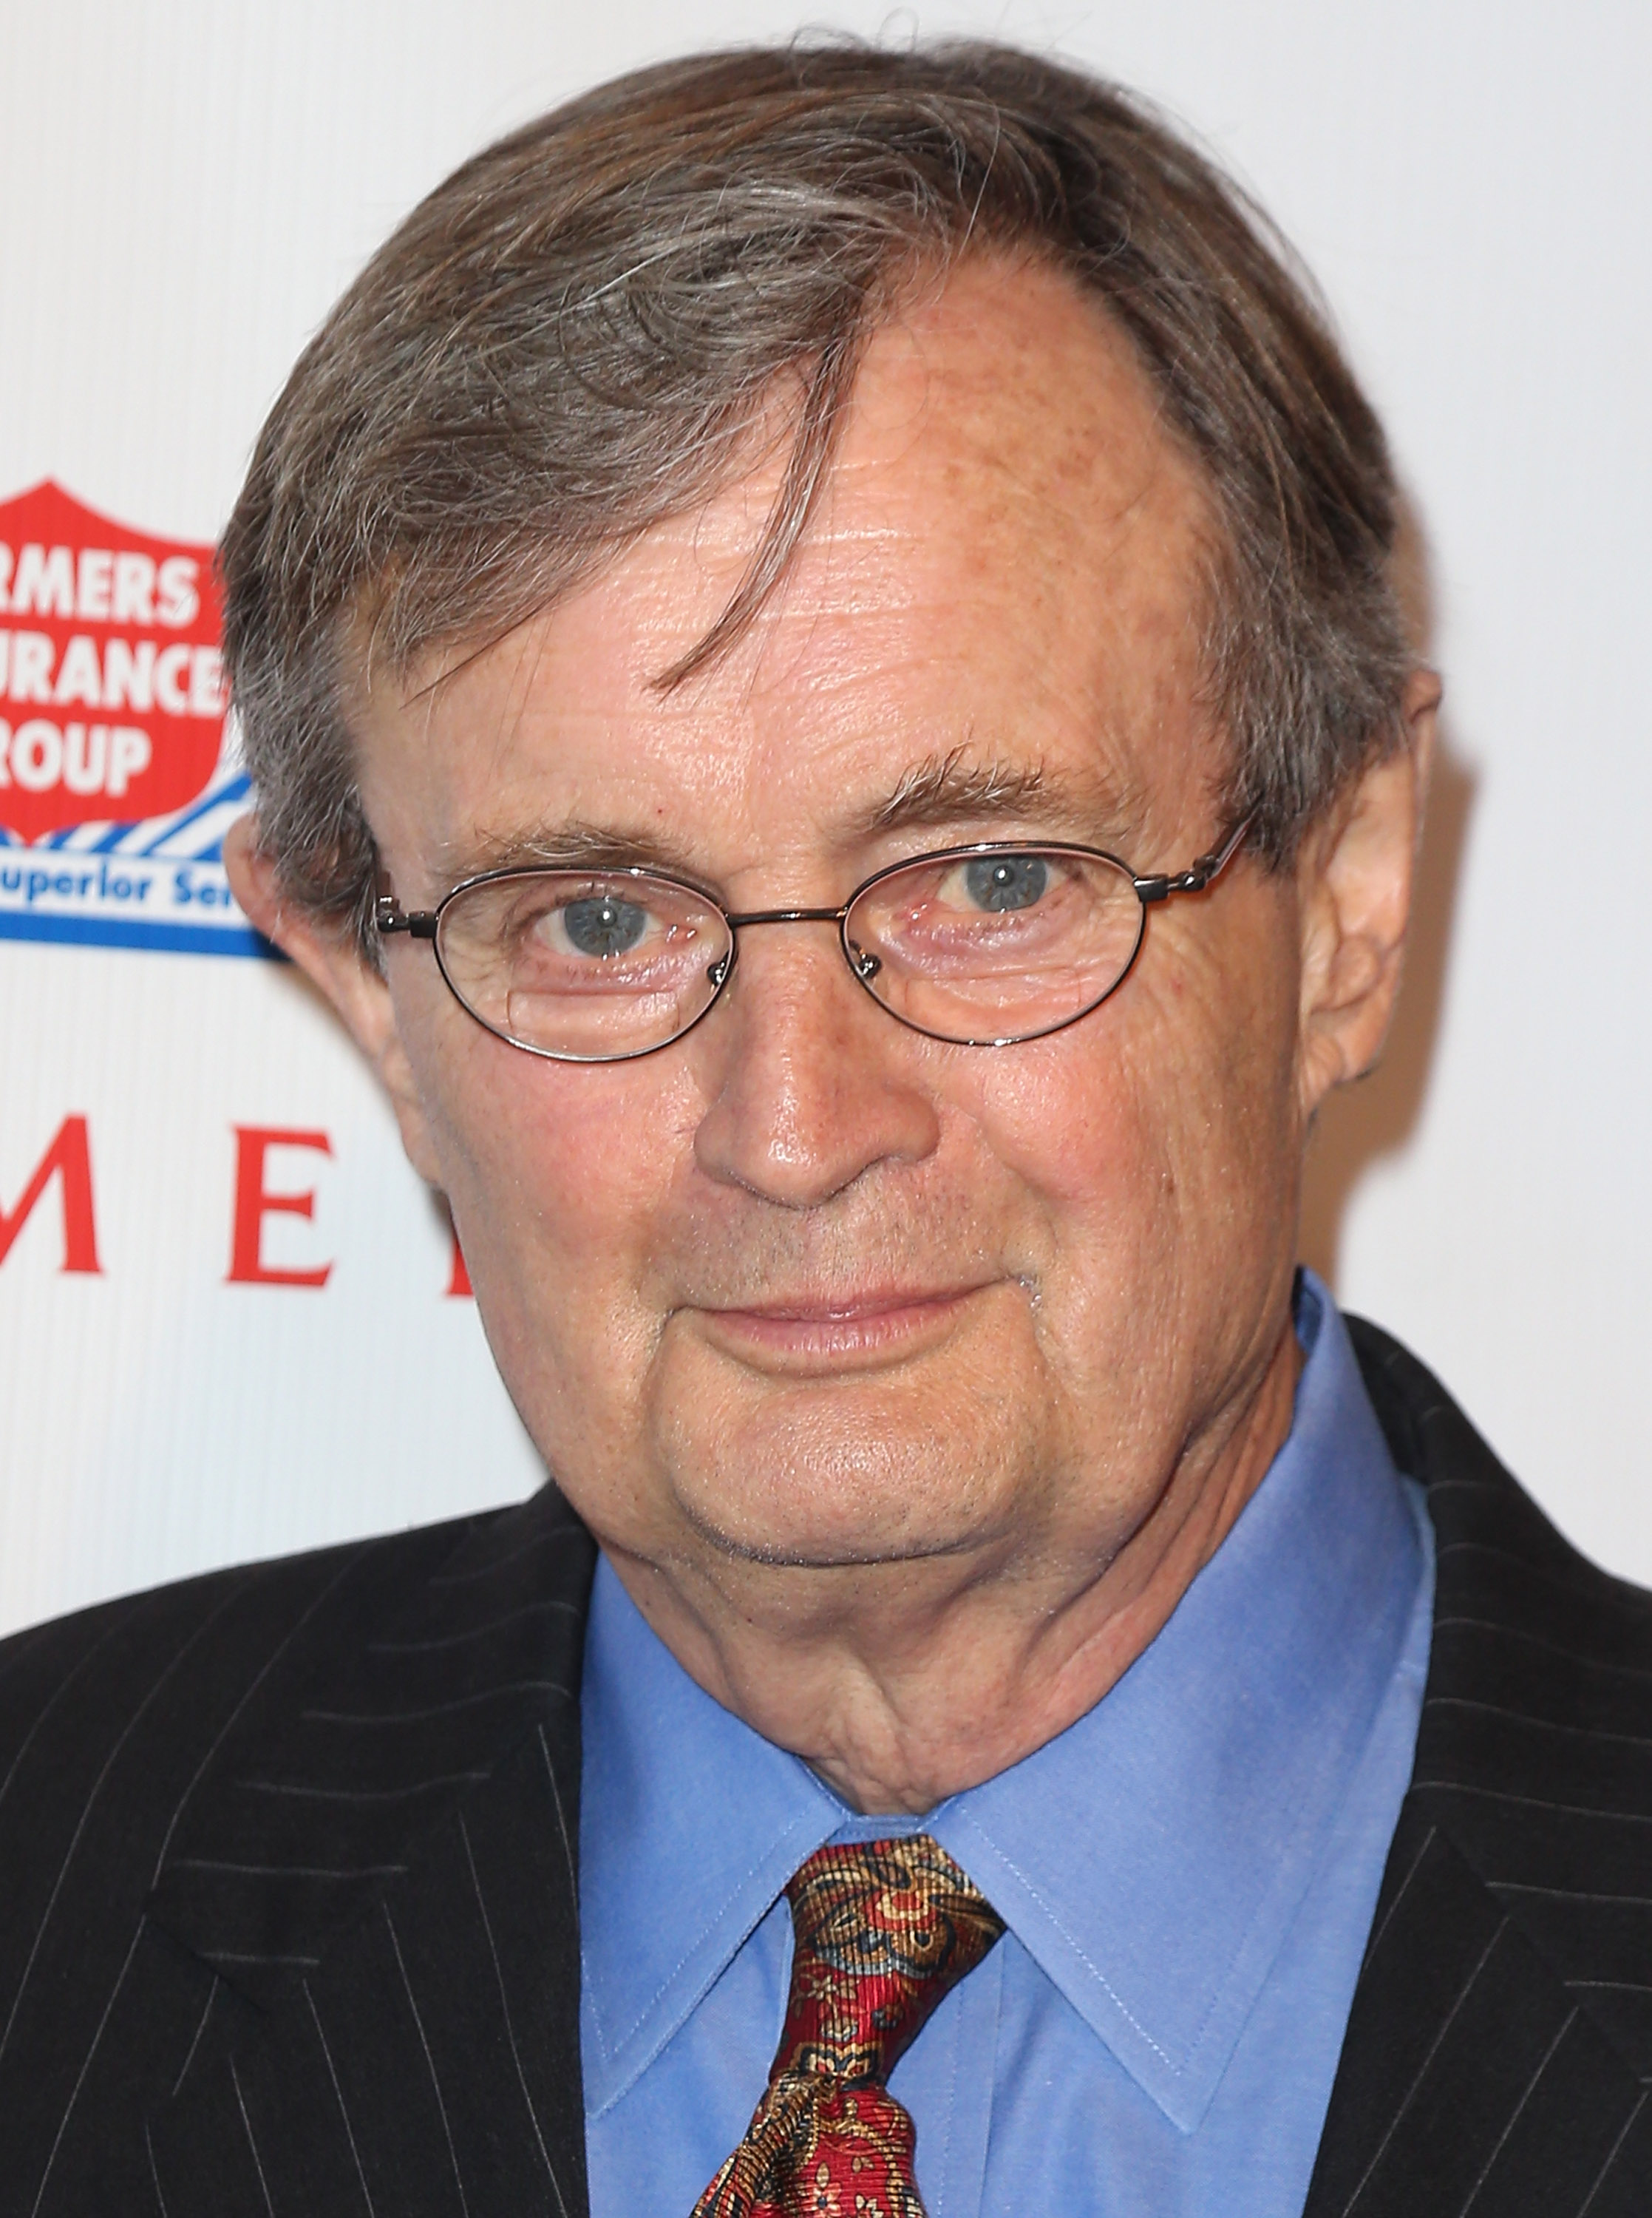 David McCallum at the 7th Annual American Red Cross Red Tie Affair in Santa Monica, California on April 6, 2013 | Source: Getty Images